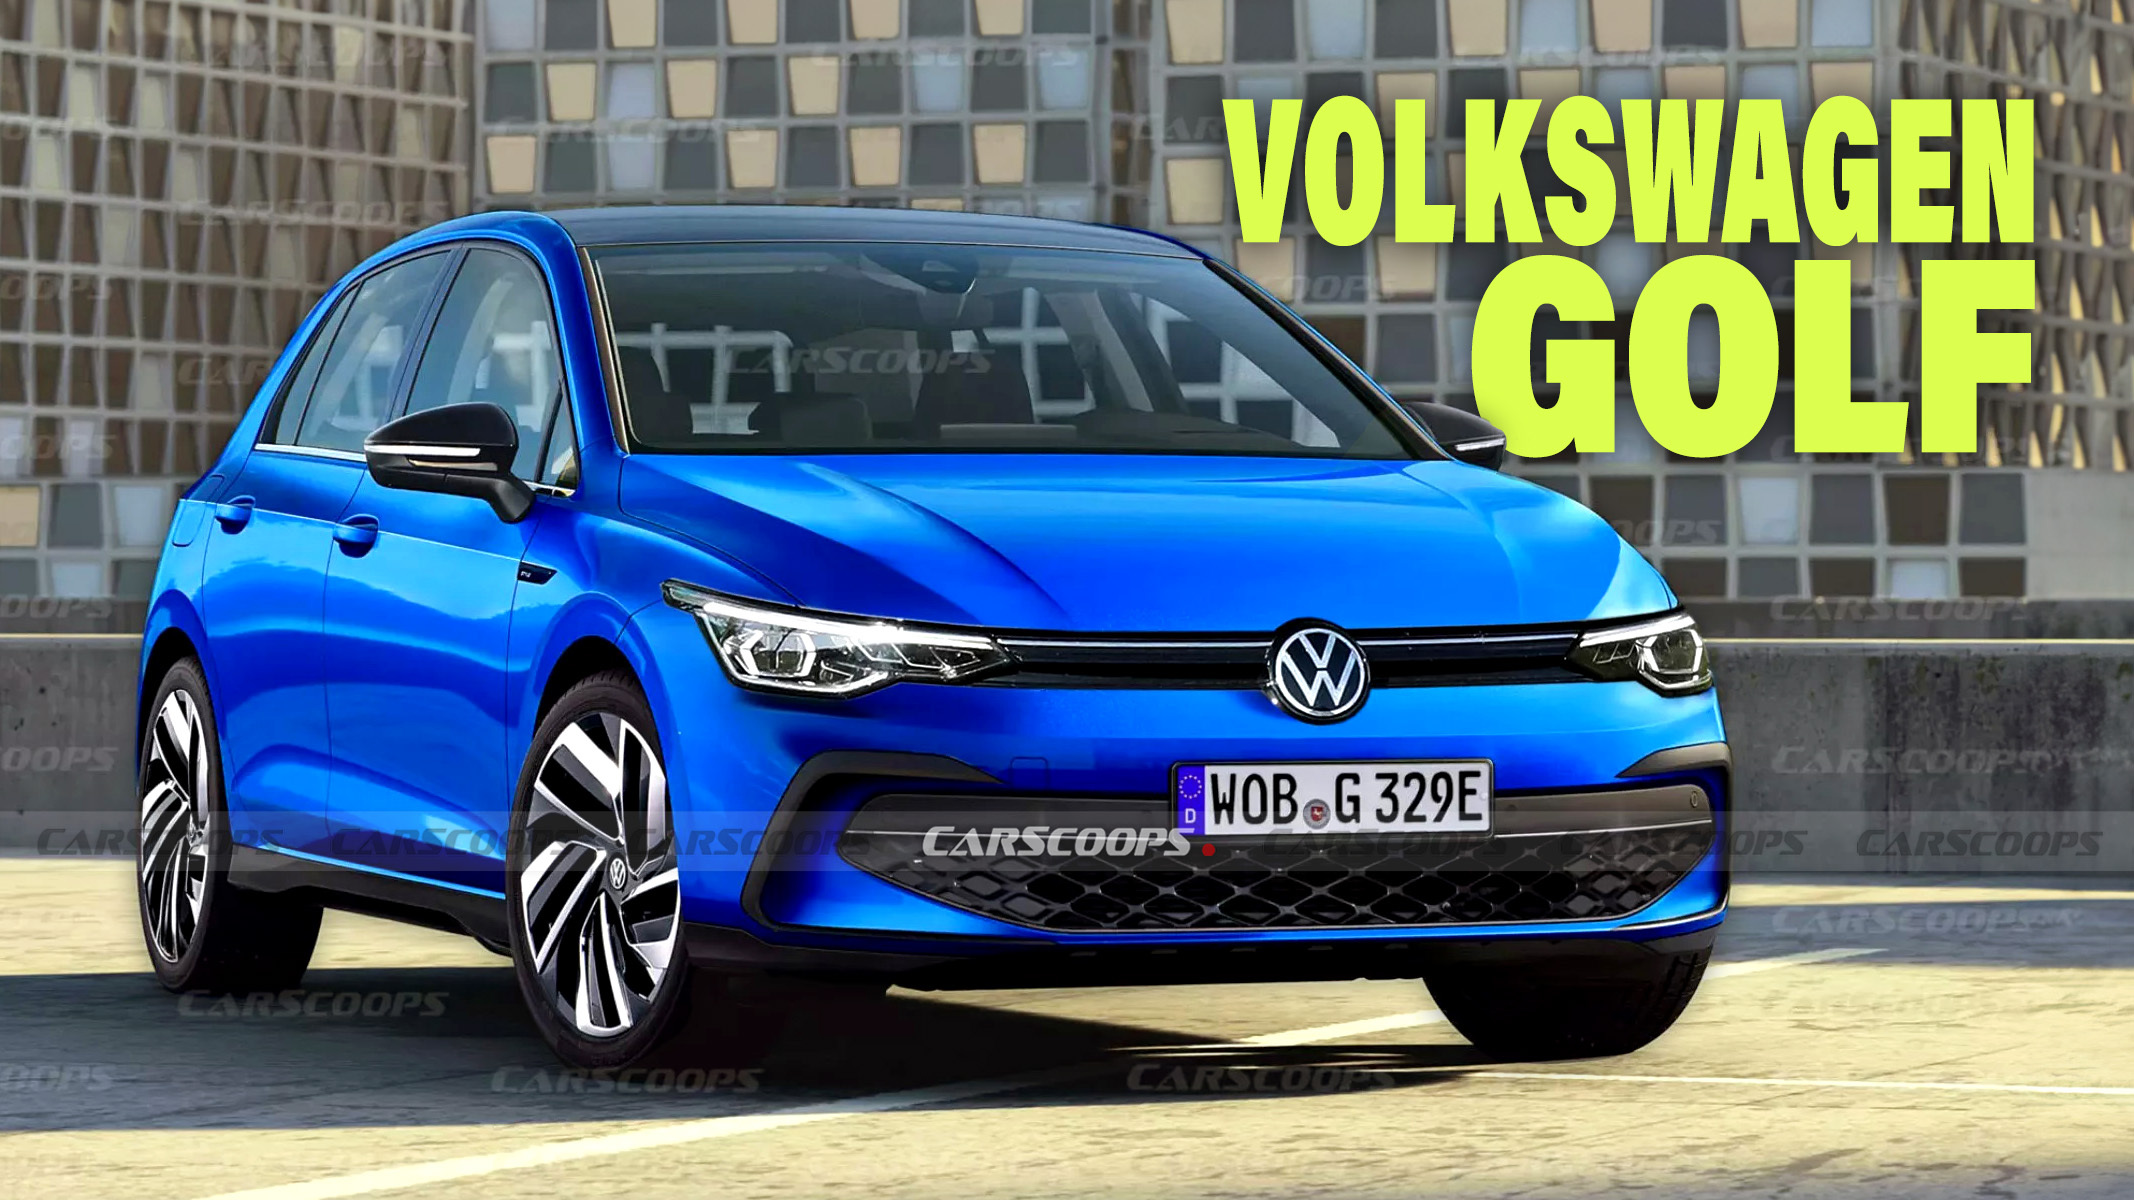 Here's the New VW Golf Wagon We Won't Get in the U.S.